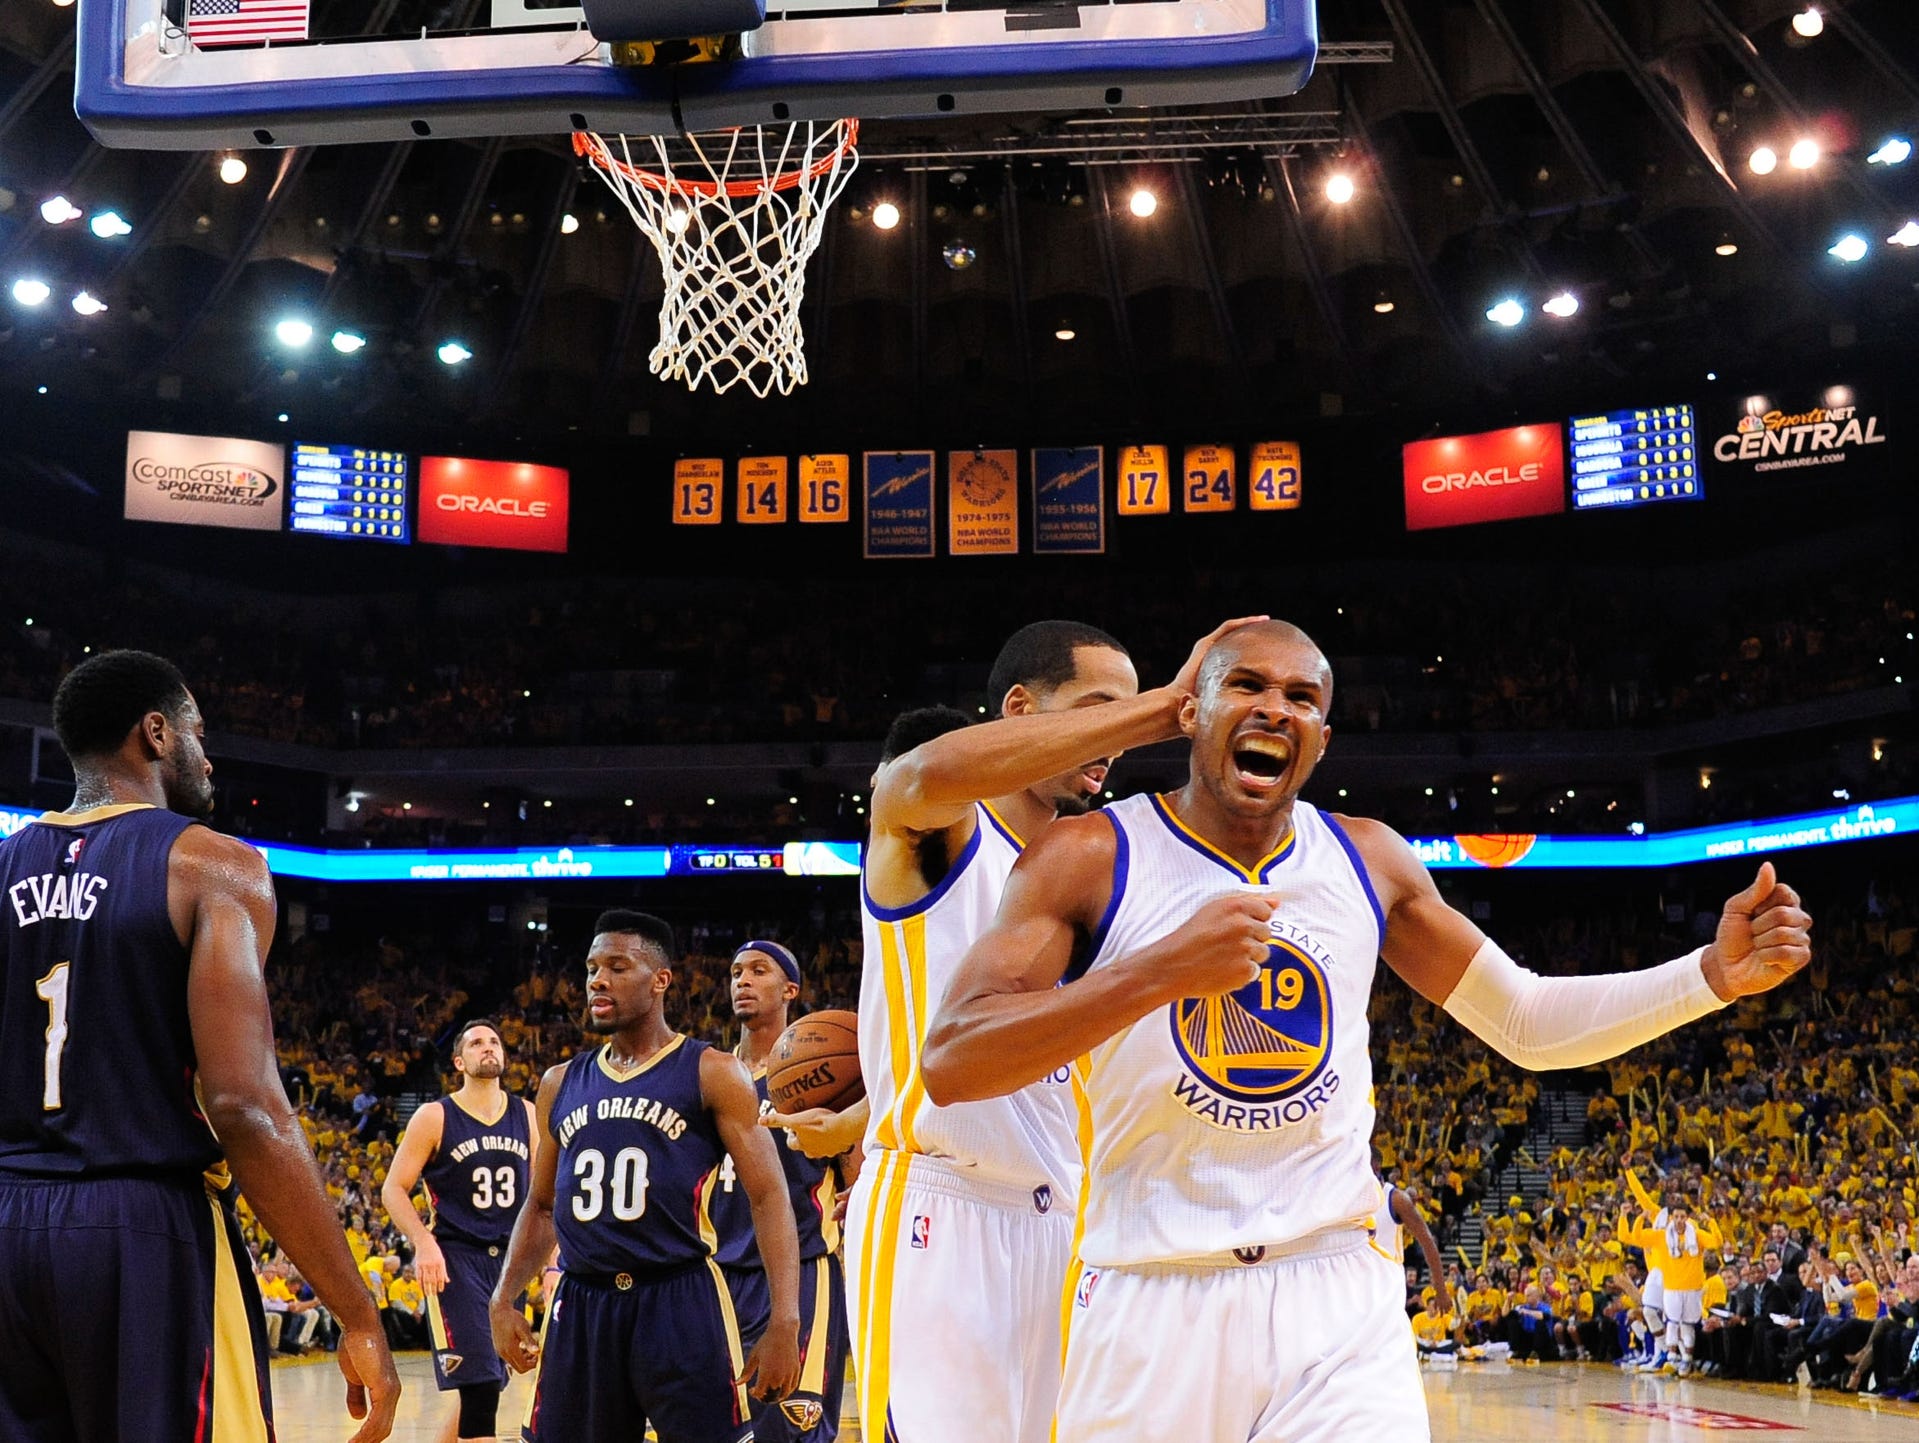 Leandro Barbosa, Golden State Warriors | He played